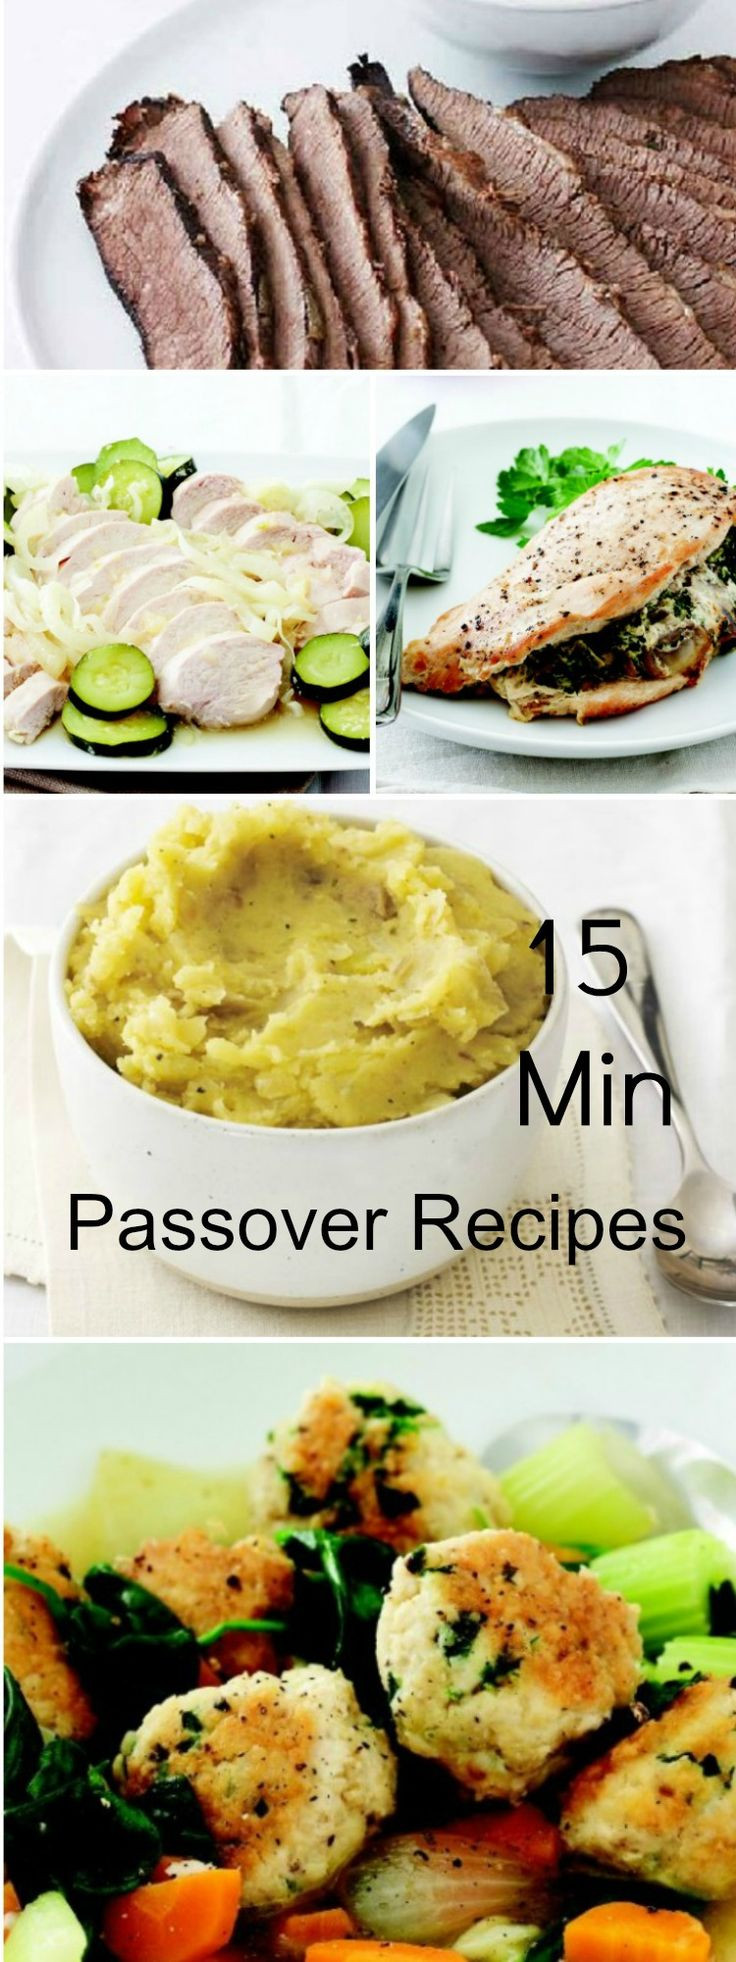 Passover Menu Ideas 2018
 Mix N Match Passover Meal Ideas Make Your Own Menu with